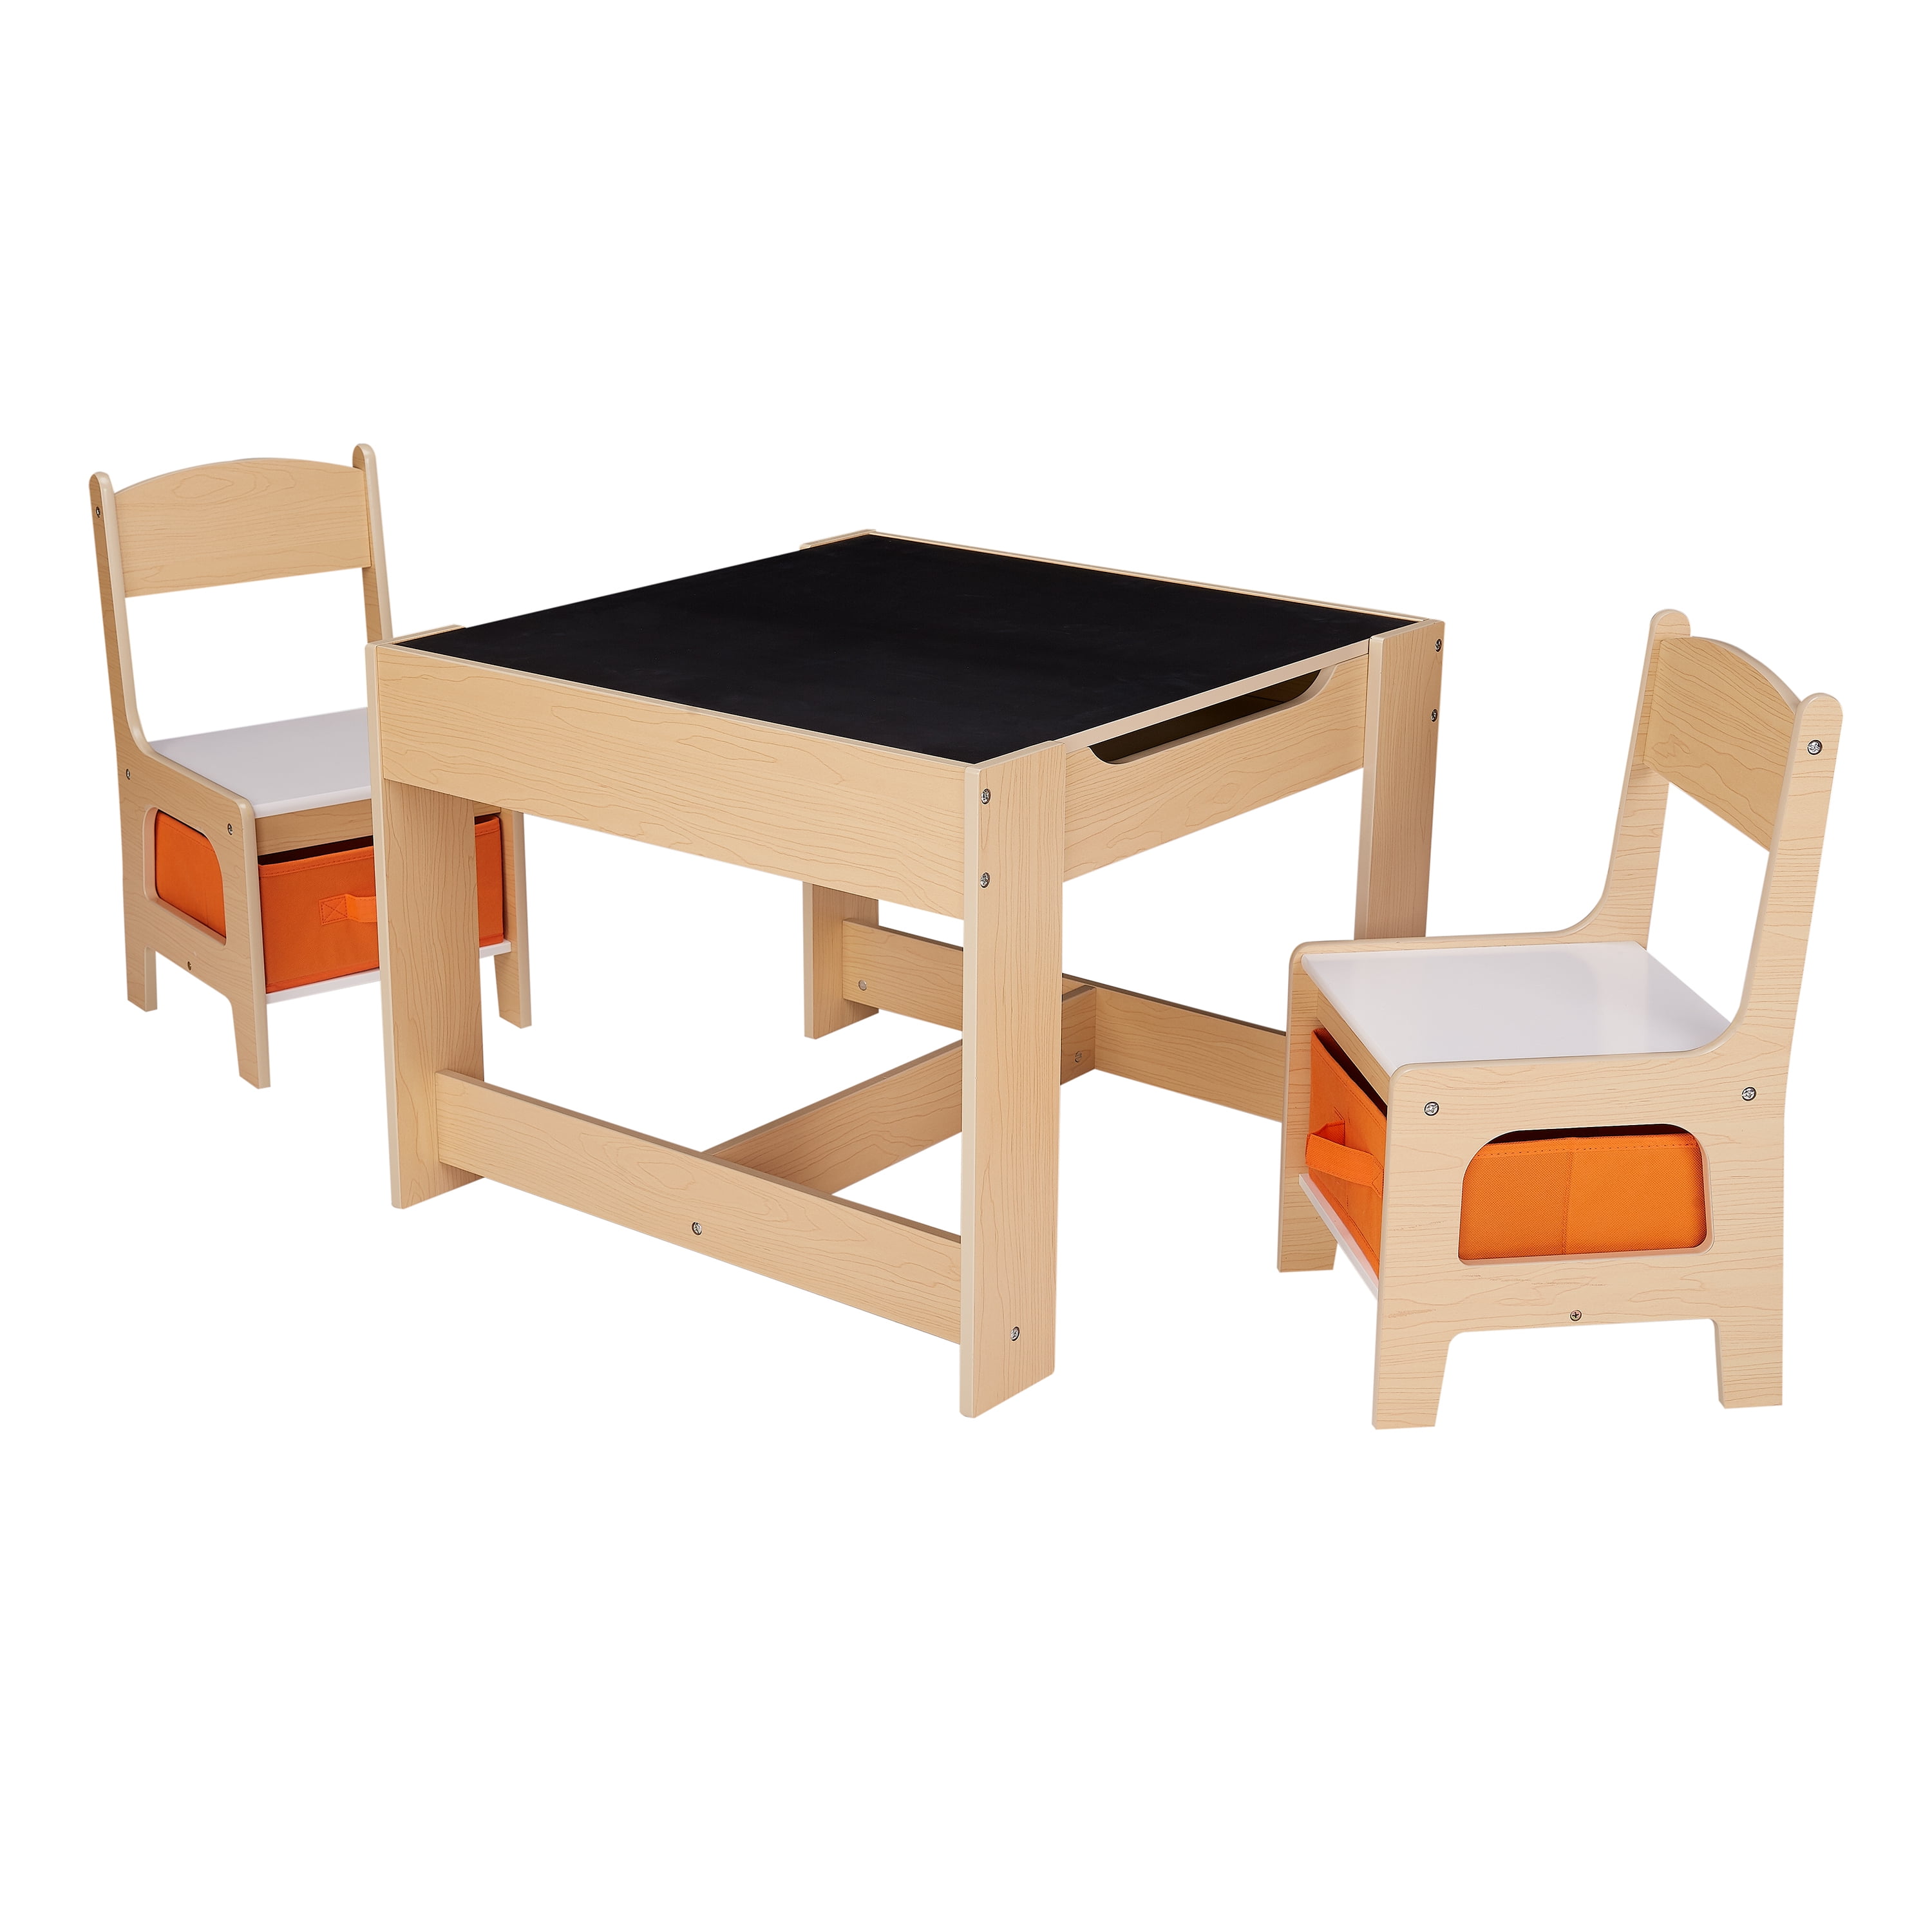 kids wooden table